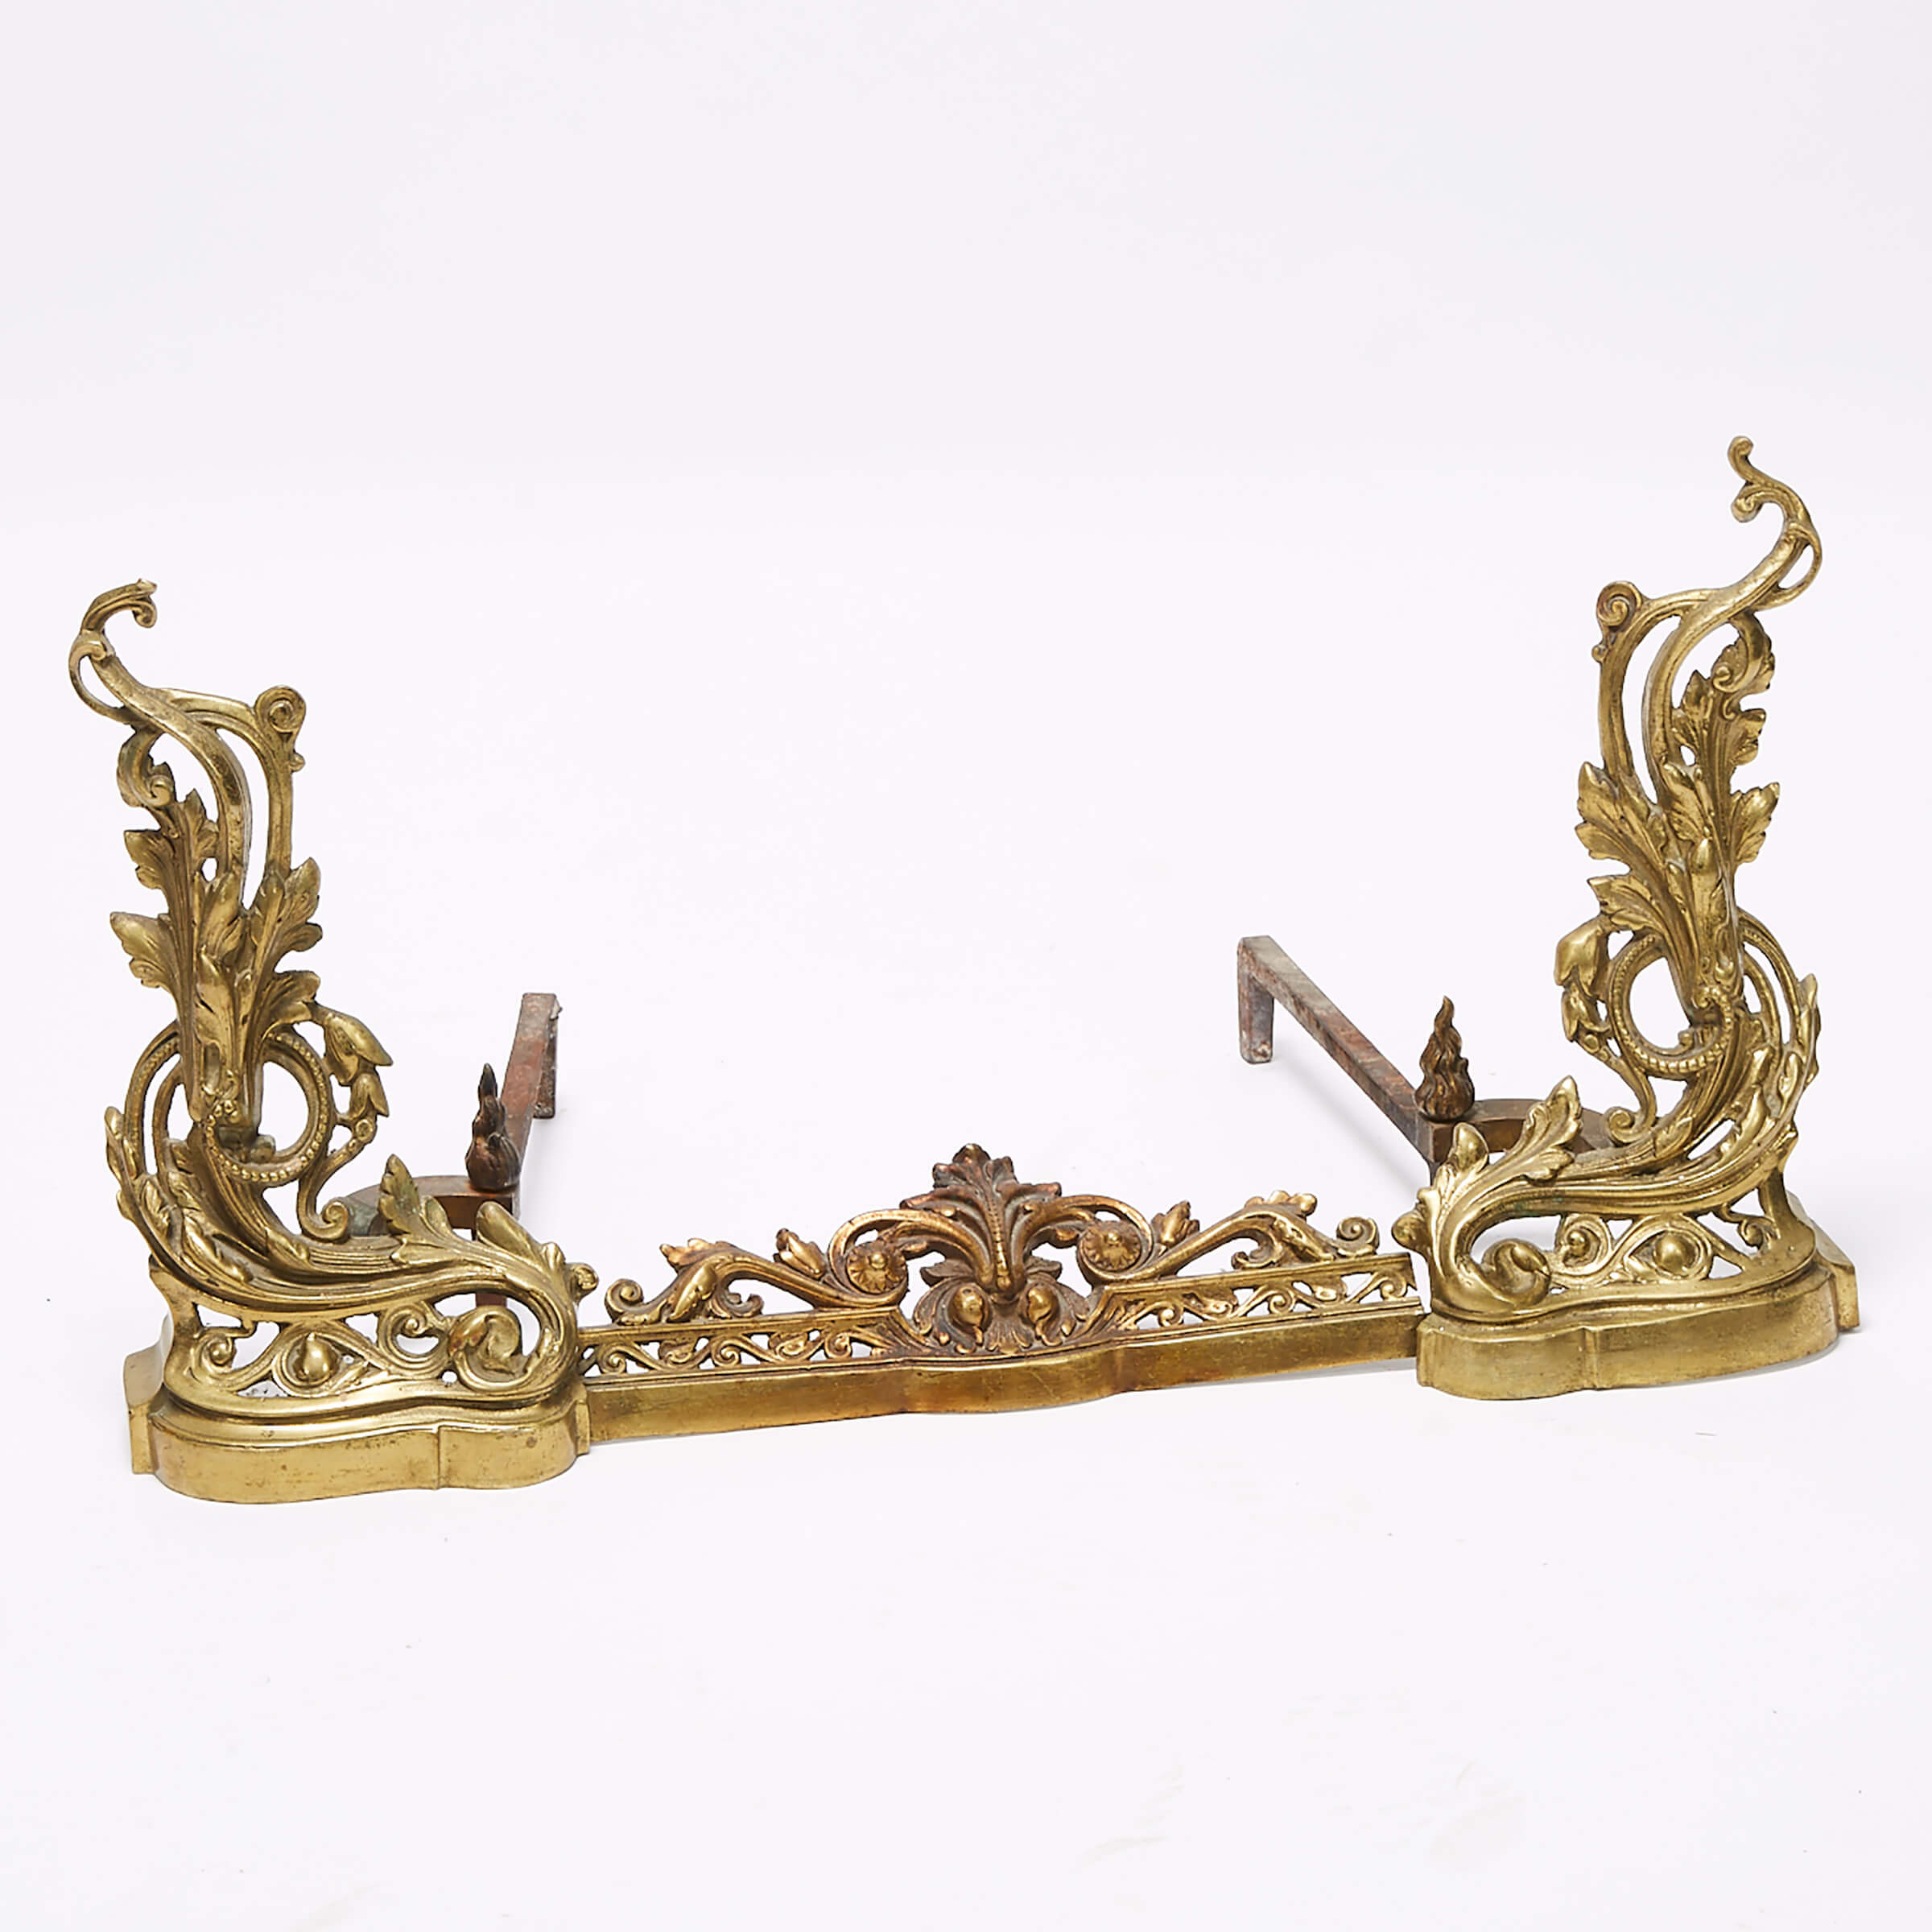 French Rococo Style Brass Fireplace Fender, early 19th century